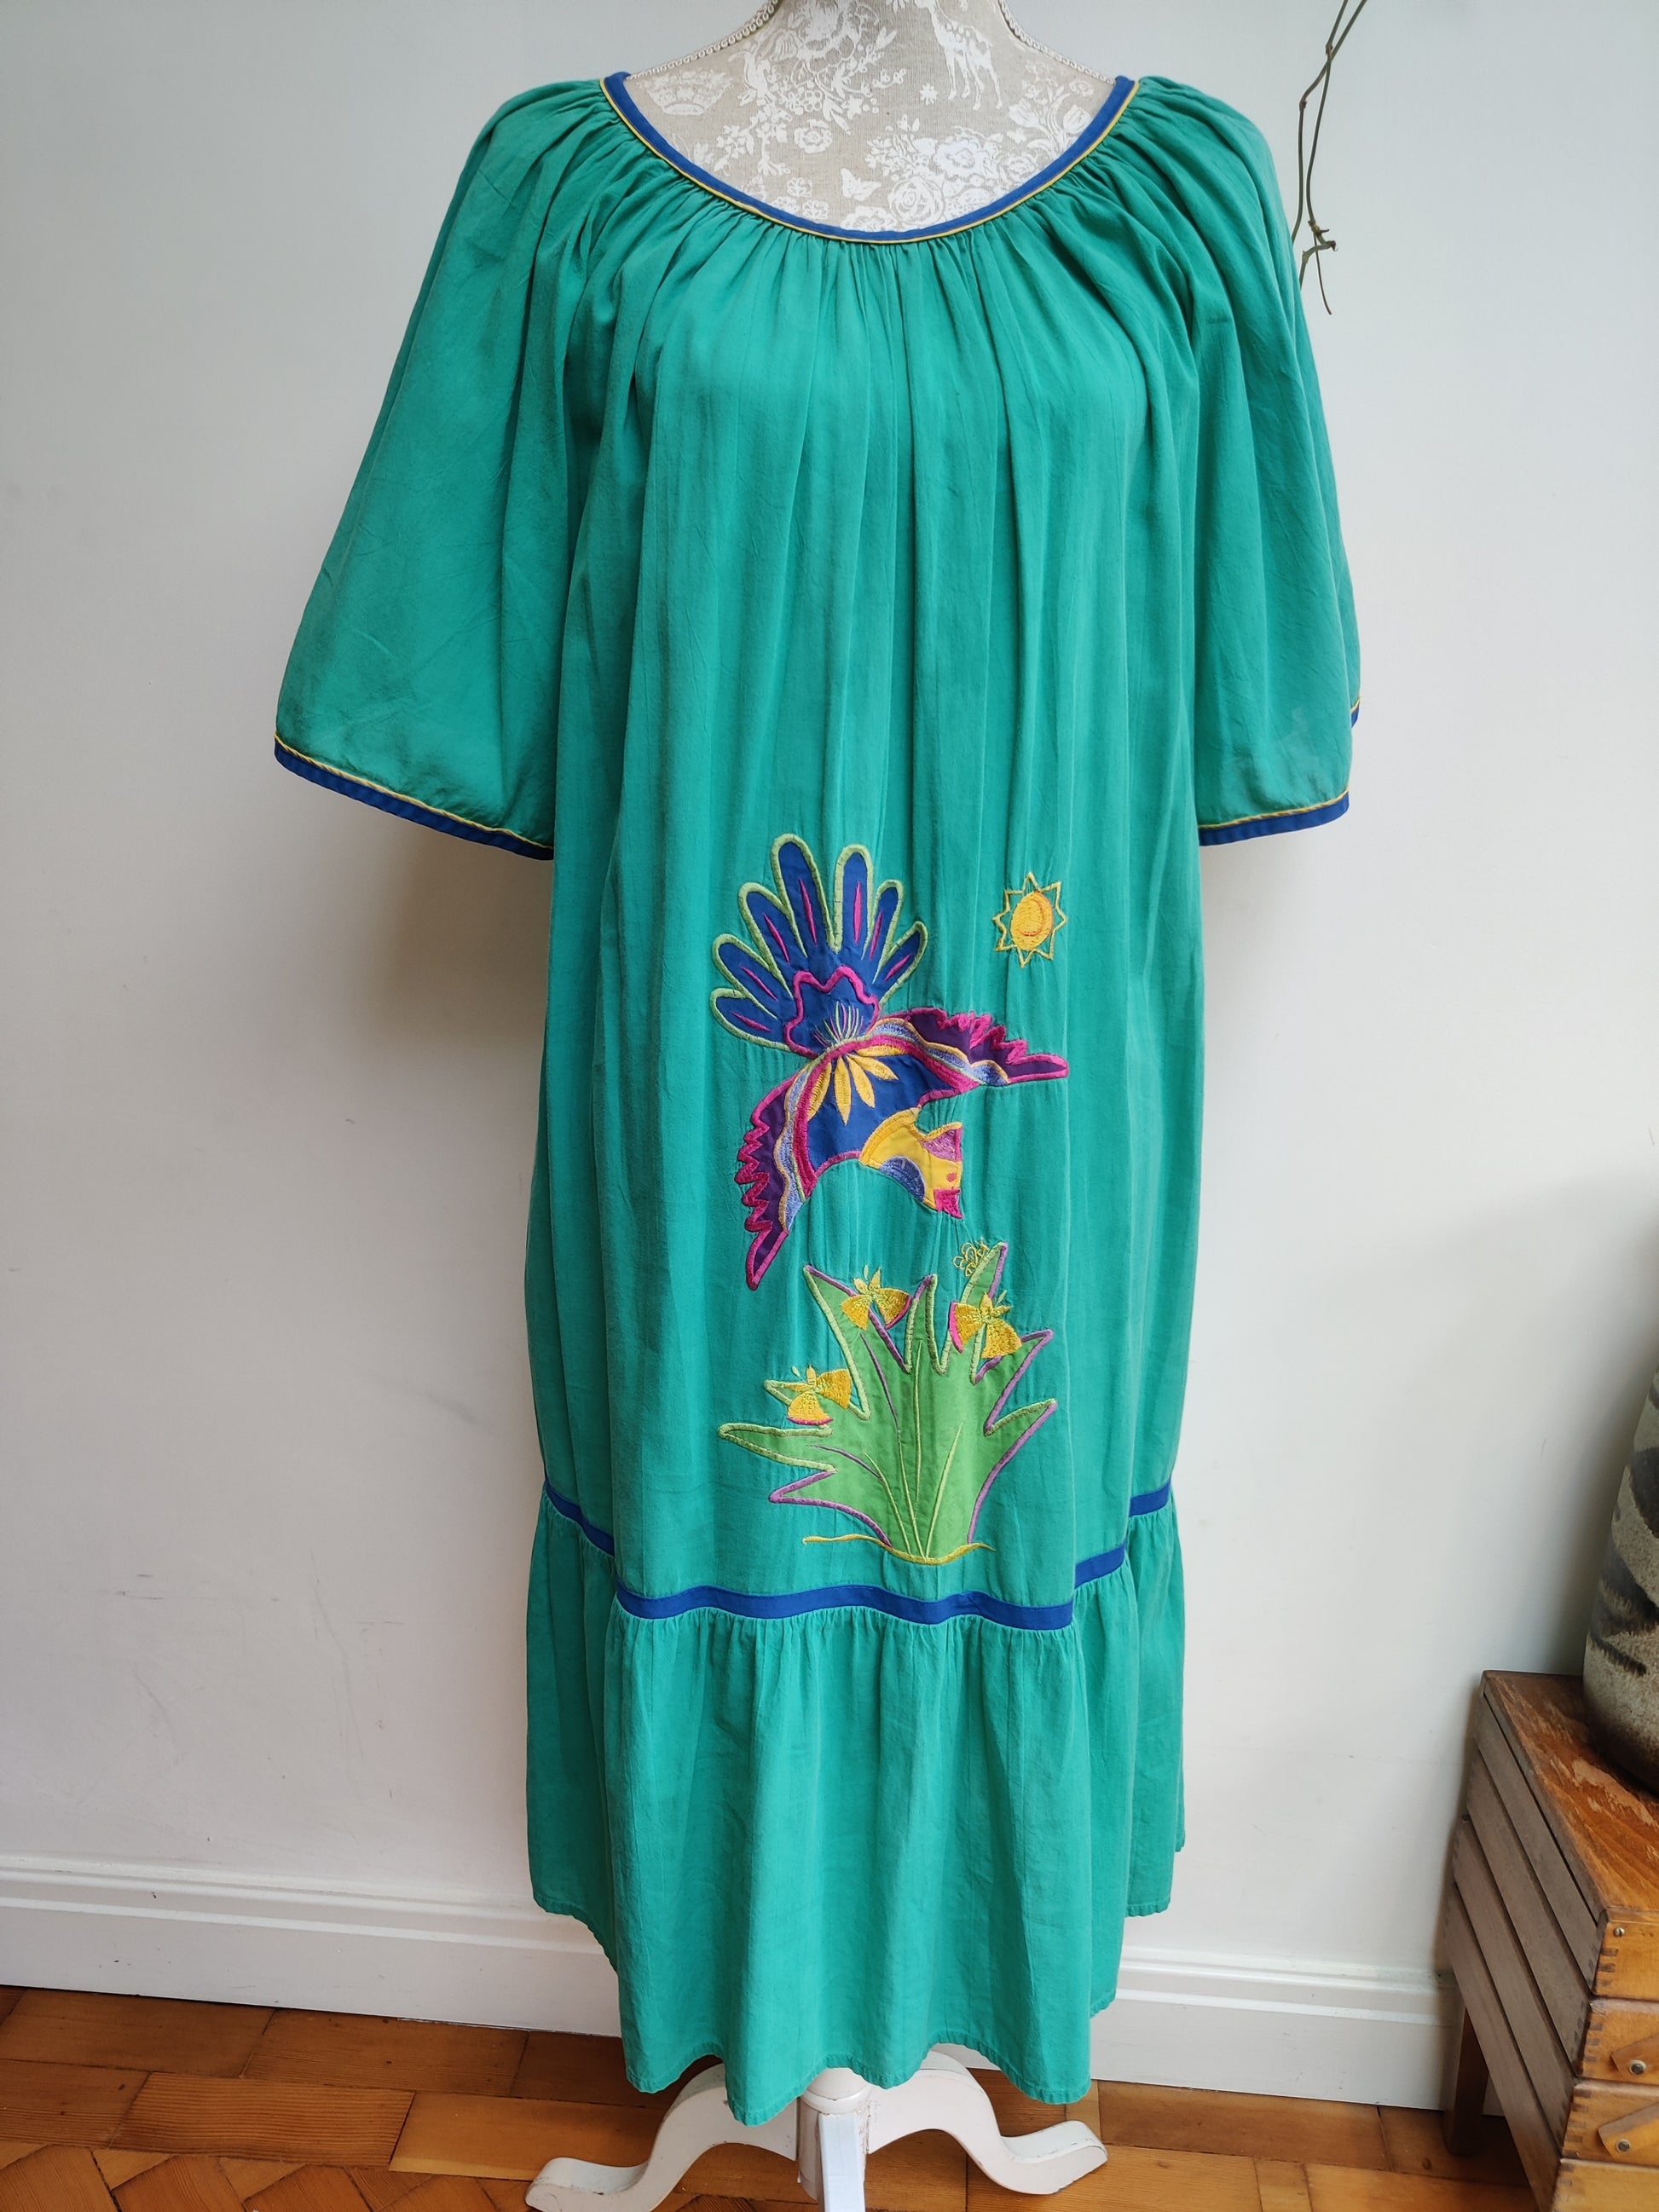 Incredible 80s dress by Appel. Medium large.